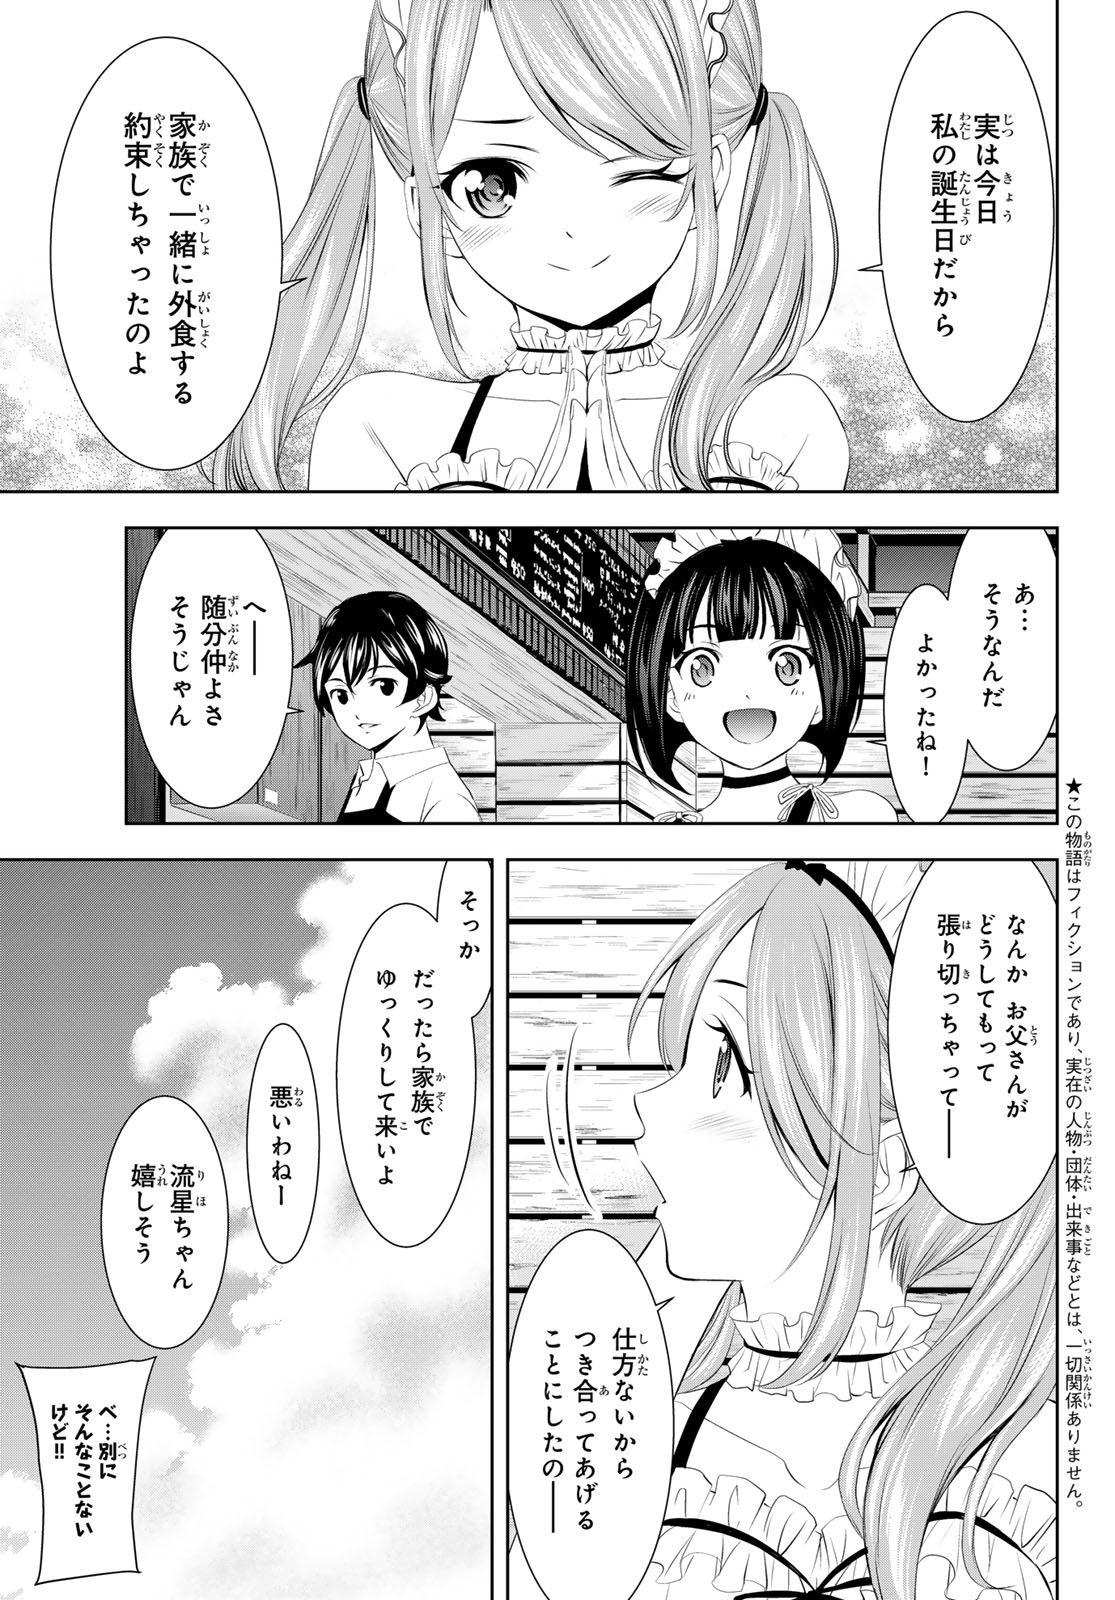 Megami no Cafe Terace - Chapter 148 - Page 3